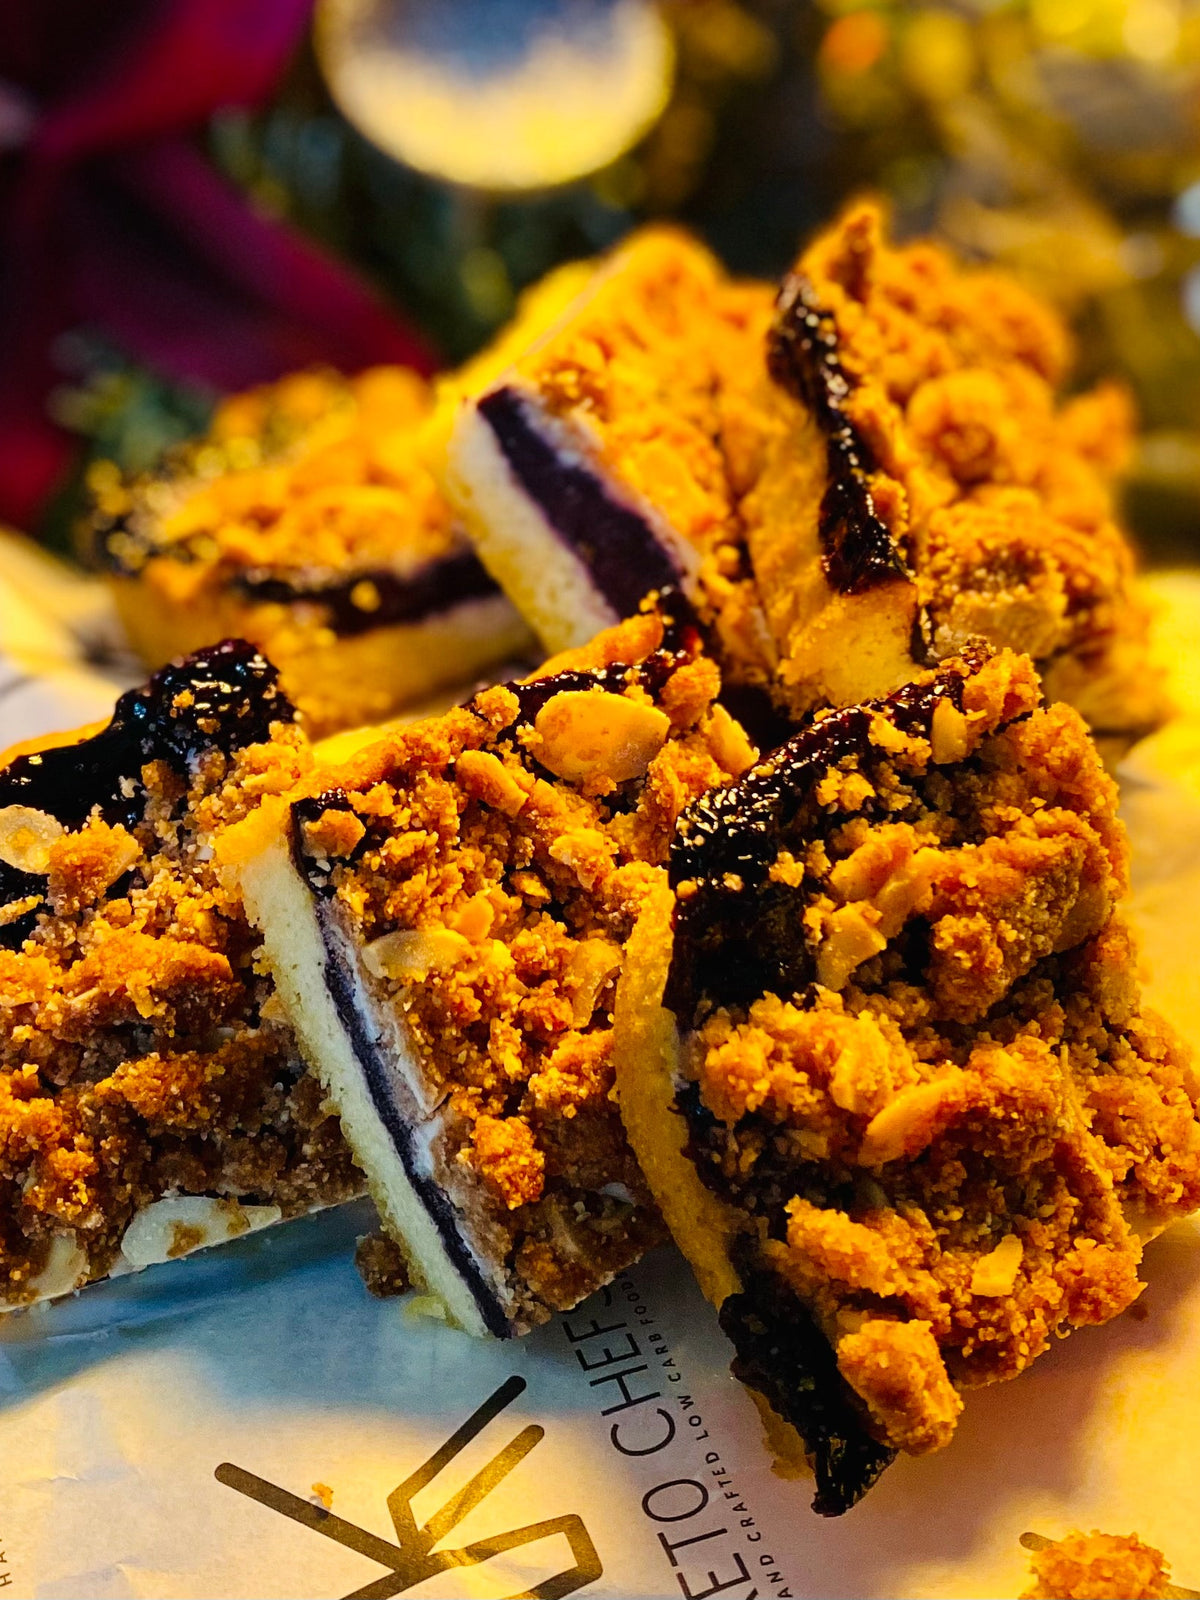 Blackberry Tray Bake Topped with Flaked Almond & Cinnamon Crumble 6/8 Portions (FREEZER FRIENDLY) 500g